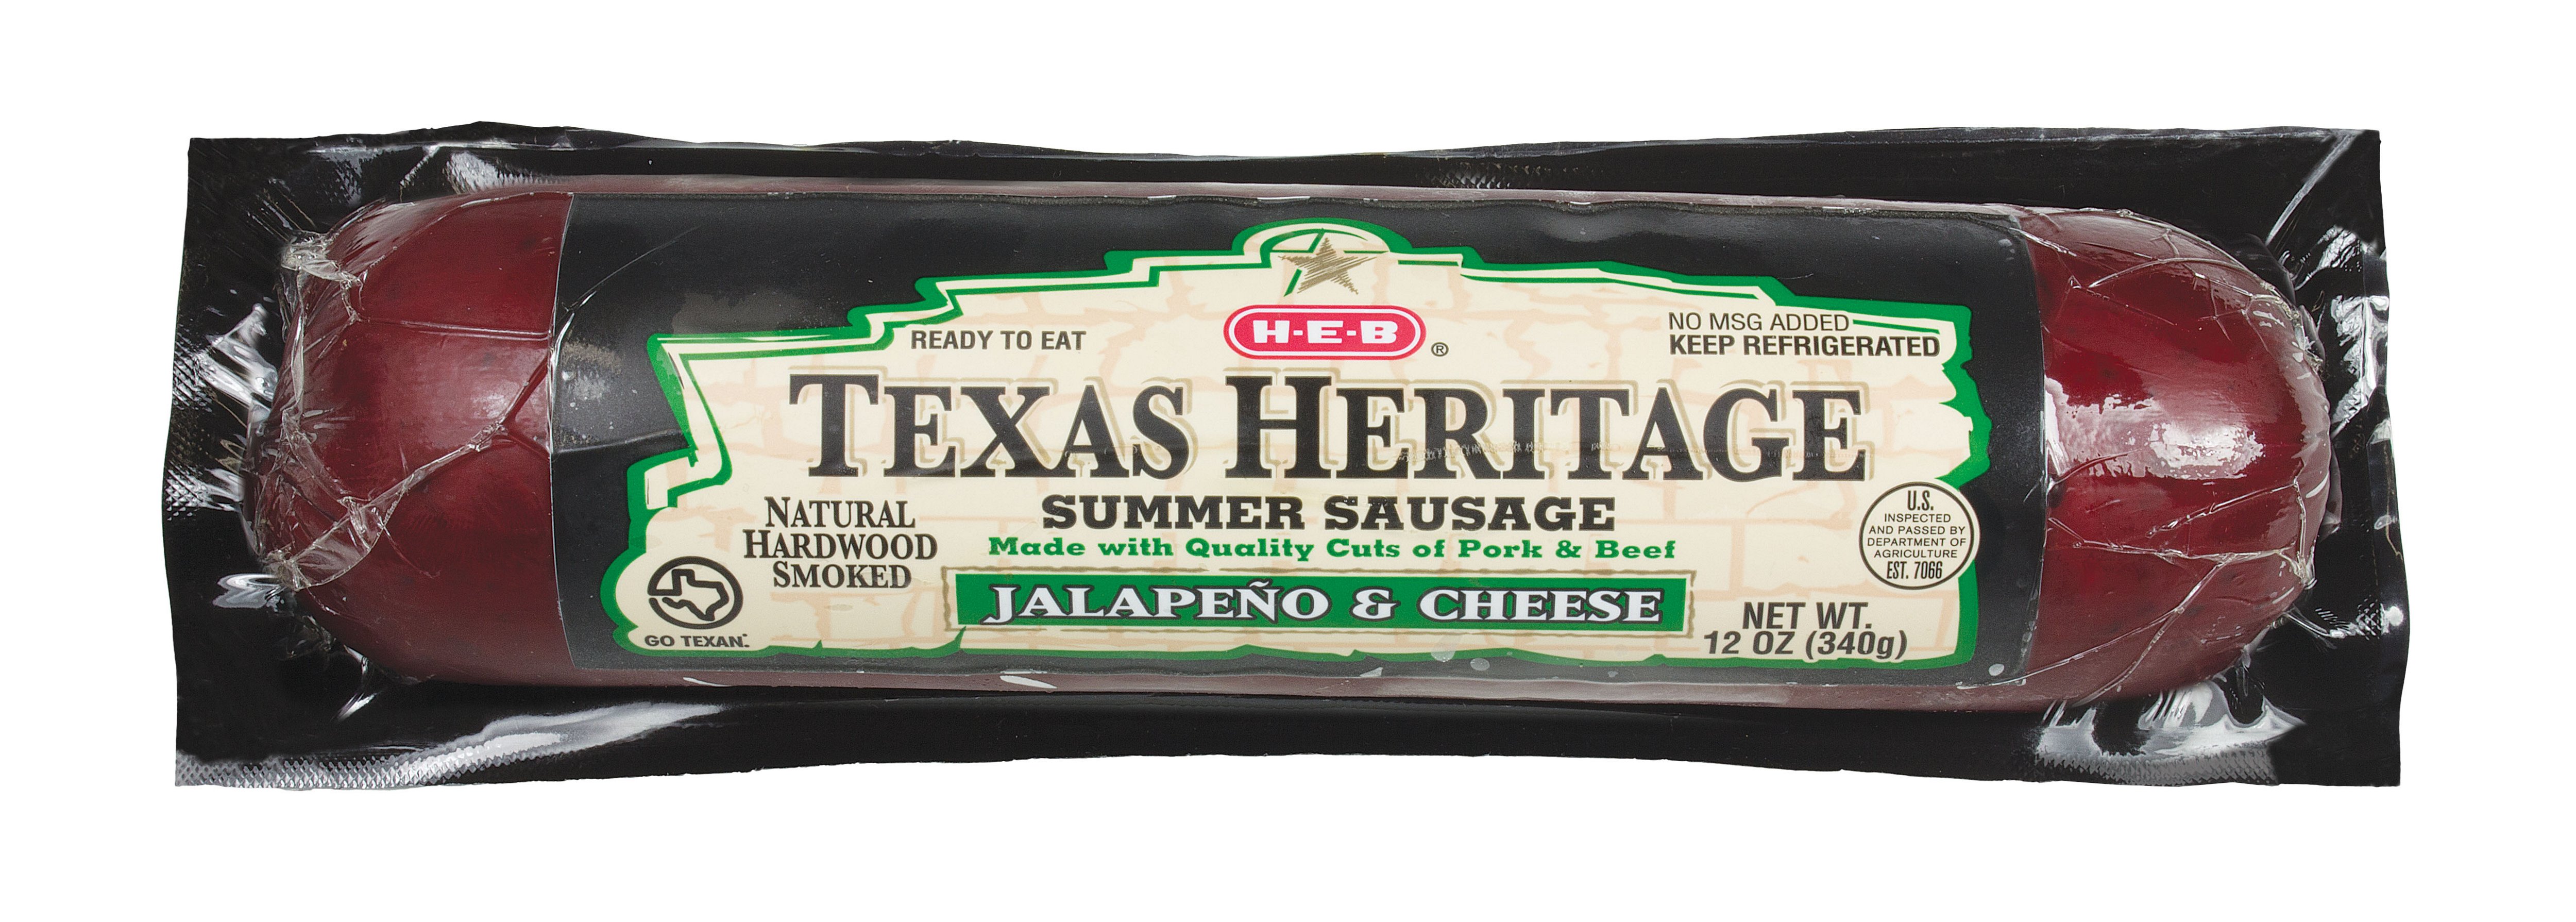 Summer Sausage with Cheese and Jalapenos – $6.39/LB – Wilson Beef